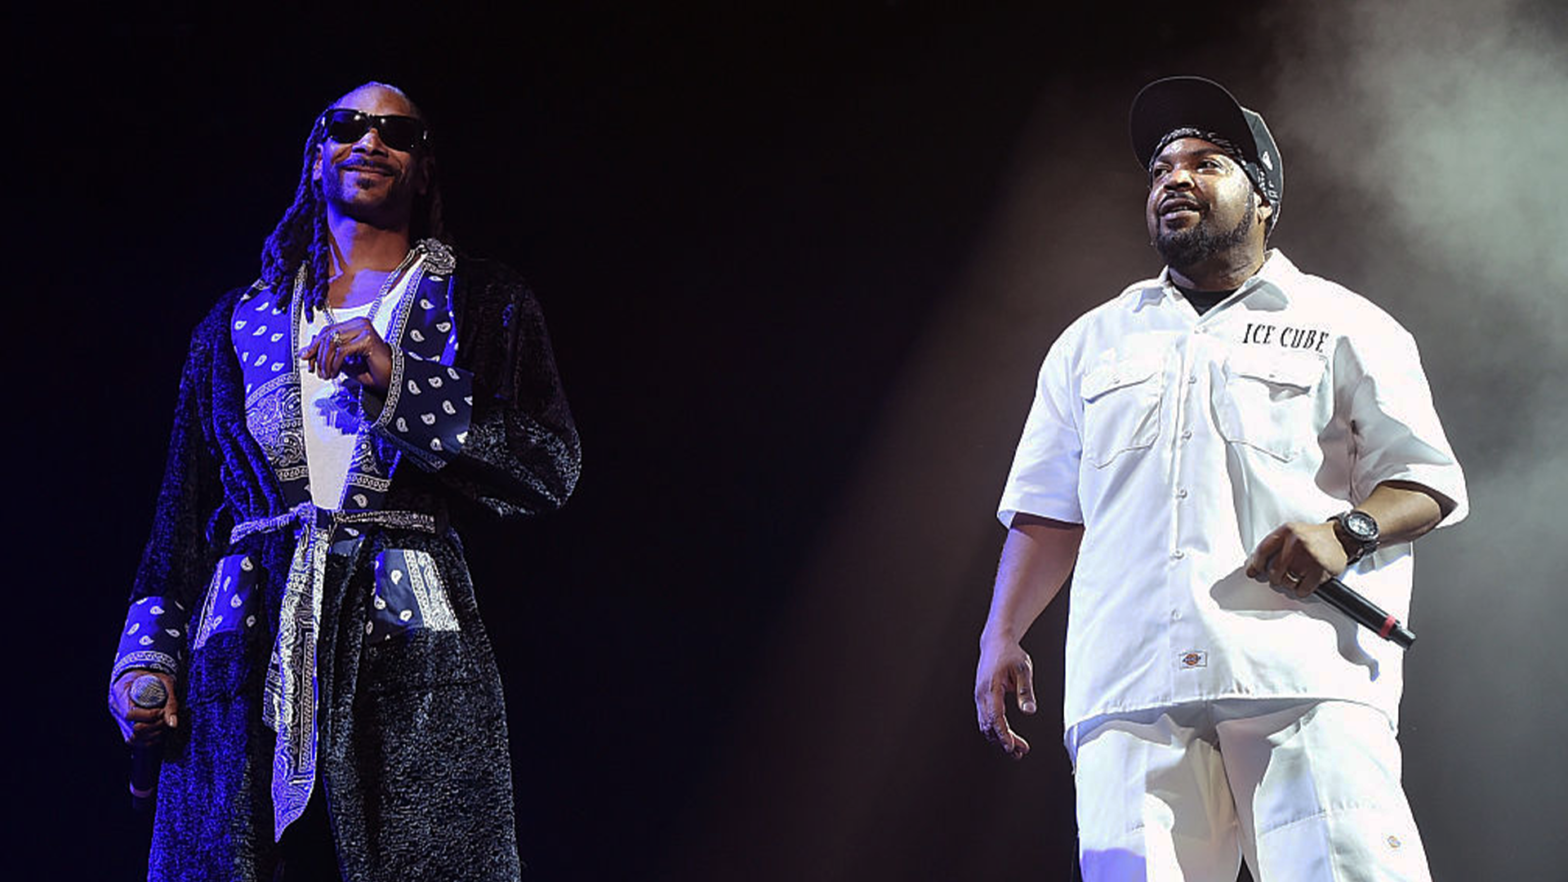 Snoop Dogg Purchases Minority Ownership Stake In Team A Part Of Ice Cube's BIG3 Basketball League